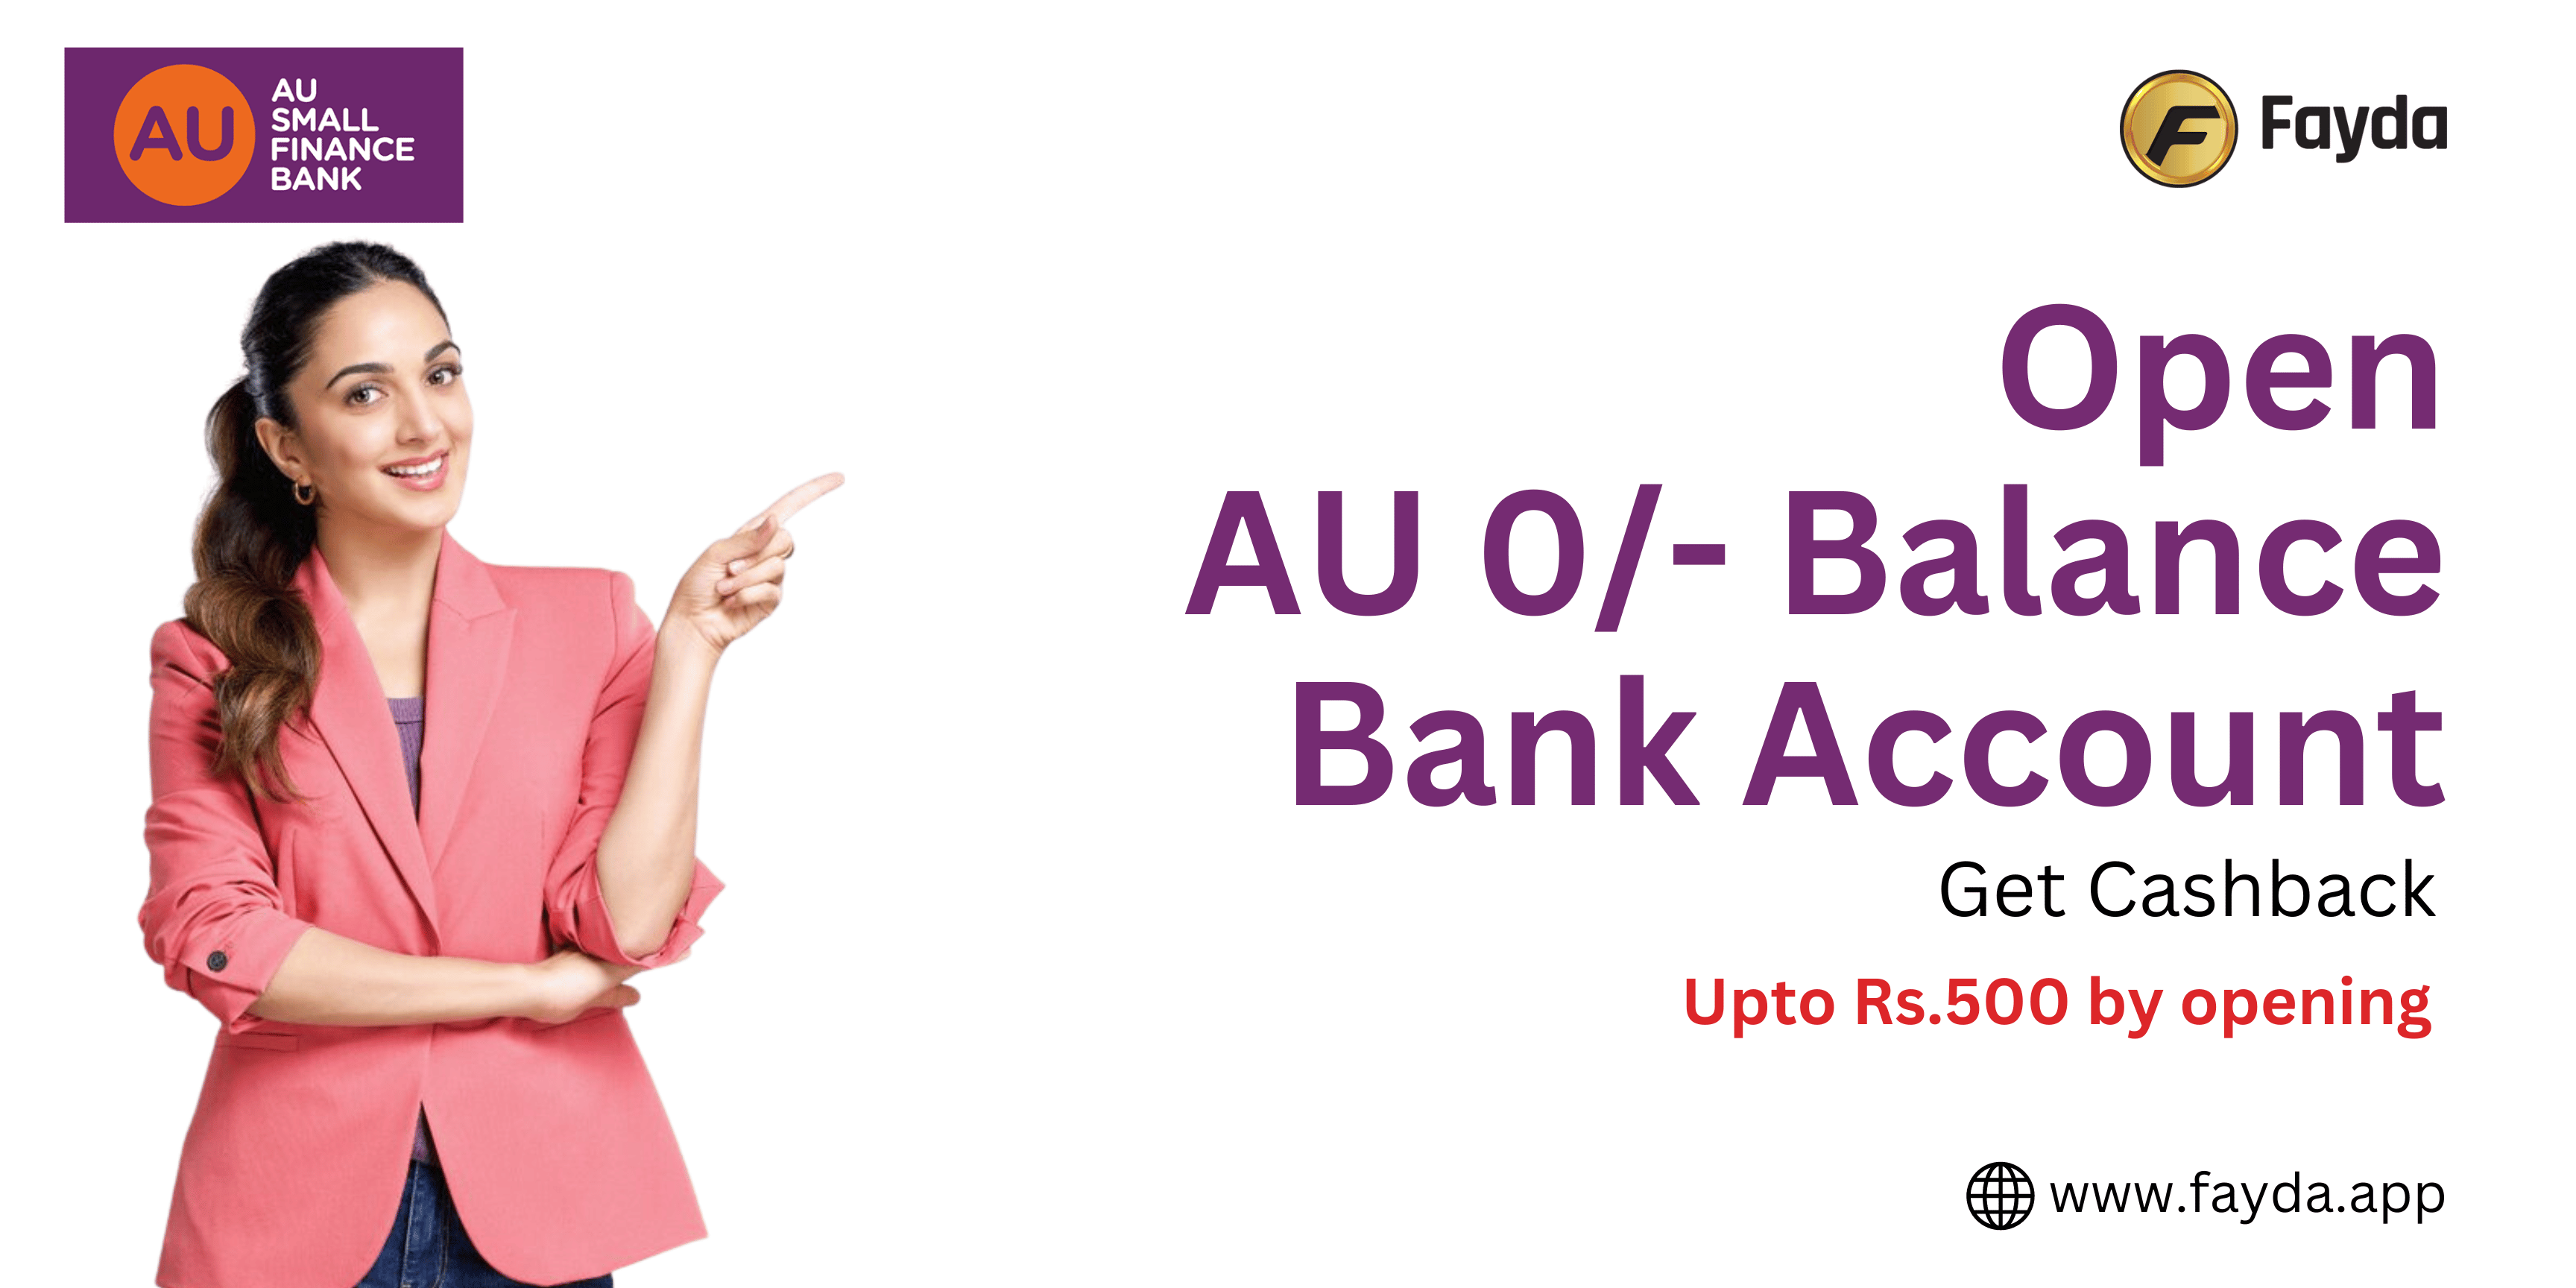 How can i open AU bank 0 balance savings account online